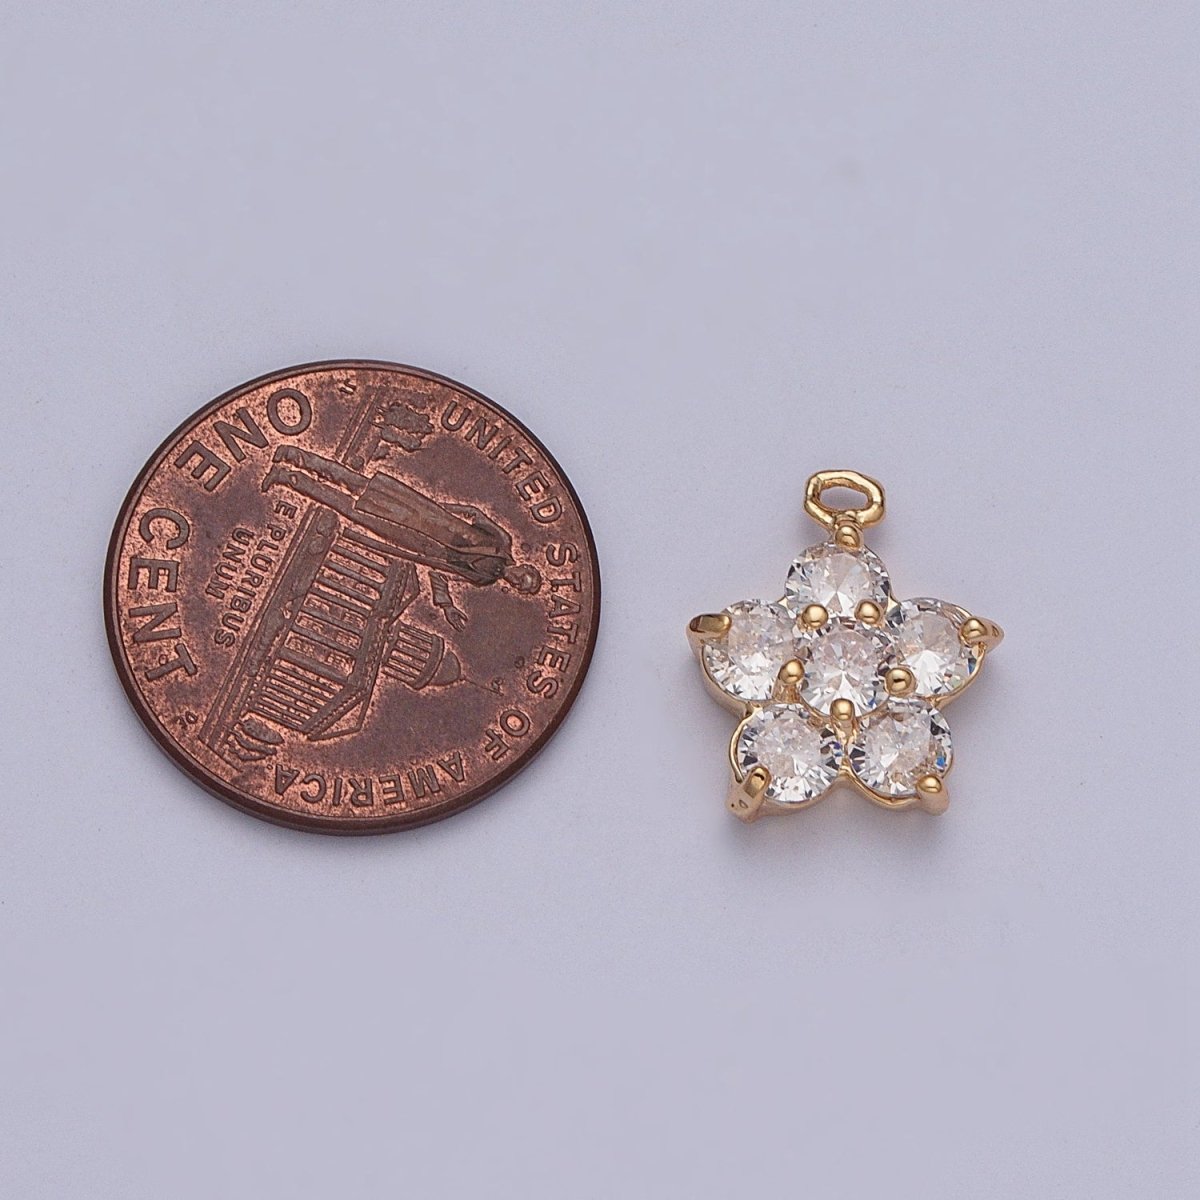 Gold Crystal Flower Round Cubic Zirconia Charm For Nature Garden Jewelry Making | X-204 - DLUXCA